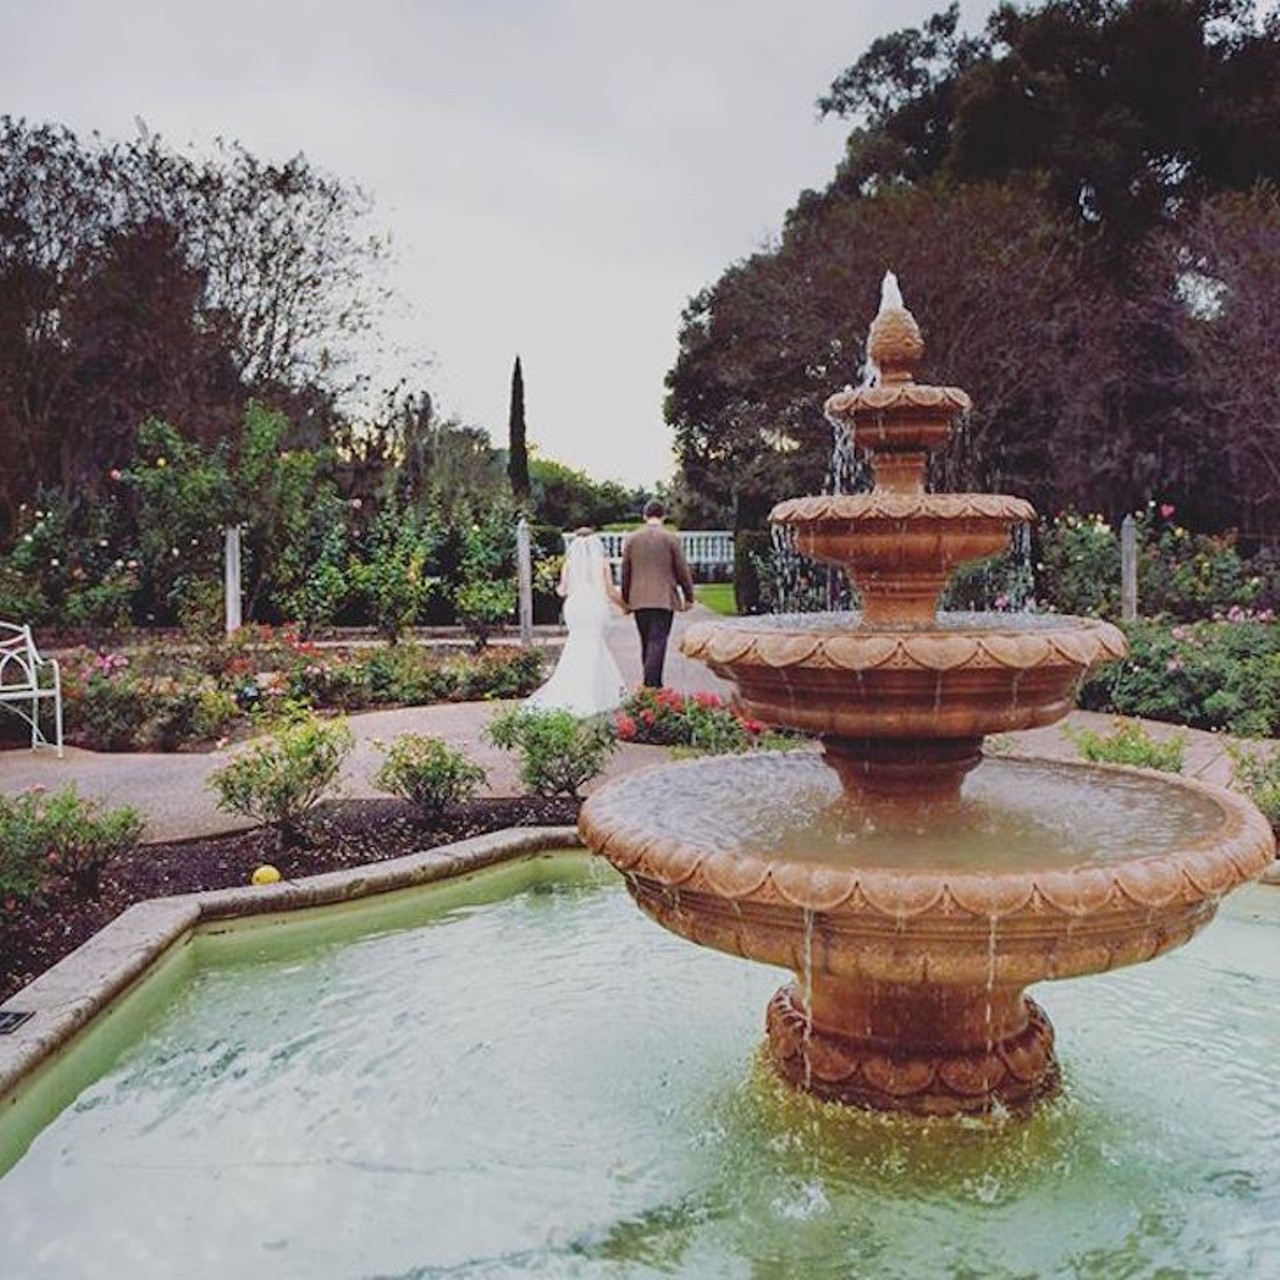 Harry P. Leu Gardens
President Obama ain't the only one who gets to enjoy a Rose Garden. Go all in on love at one of Orlando's most botanically-beautiful spots where you can host your ceremony in their intimate Rose Garden.
1300 S. Orlando Ave., Maitland | 407-246-2620
Photo via lindsayacope/Instagram